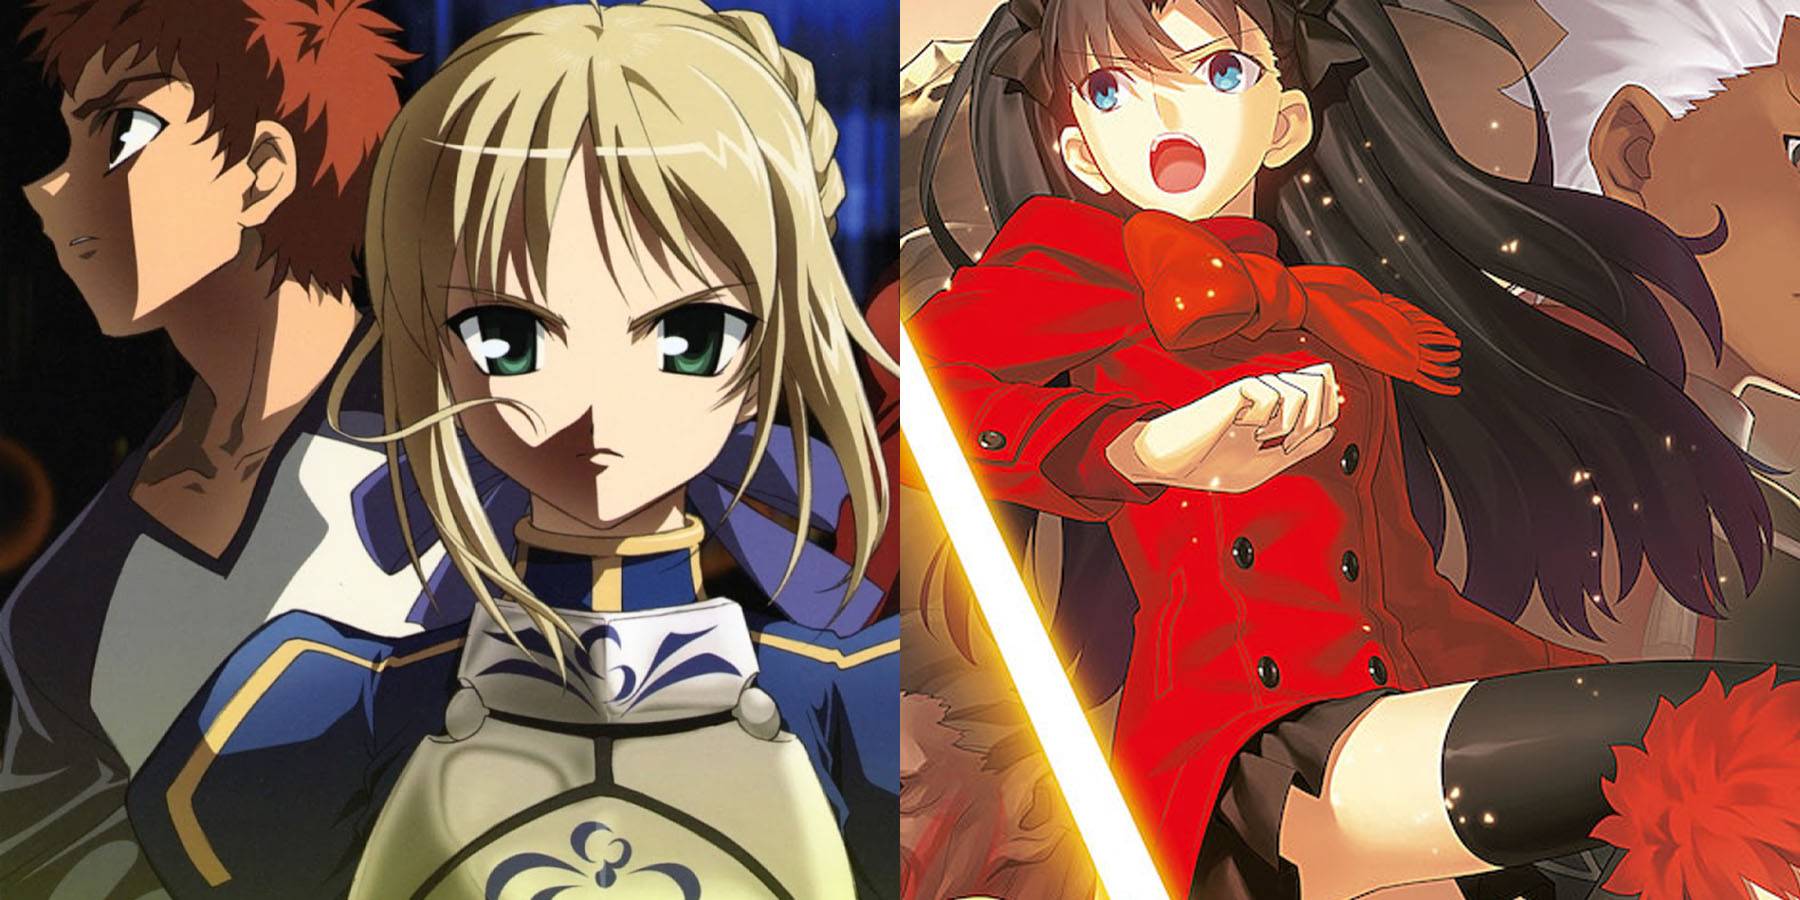 Fate stay night 2006 vs unlimited blade works